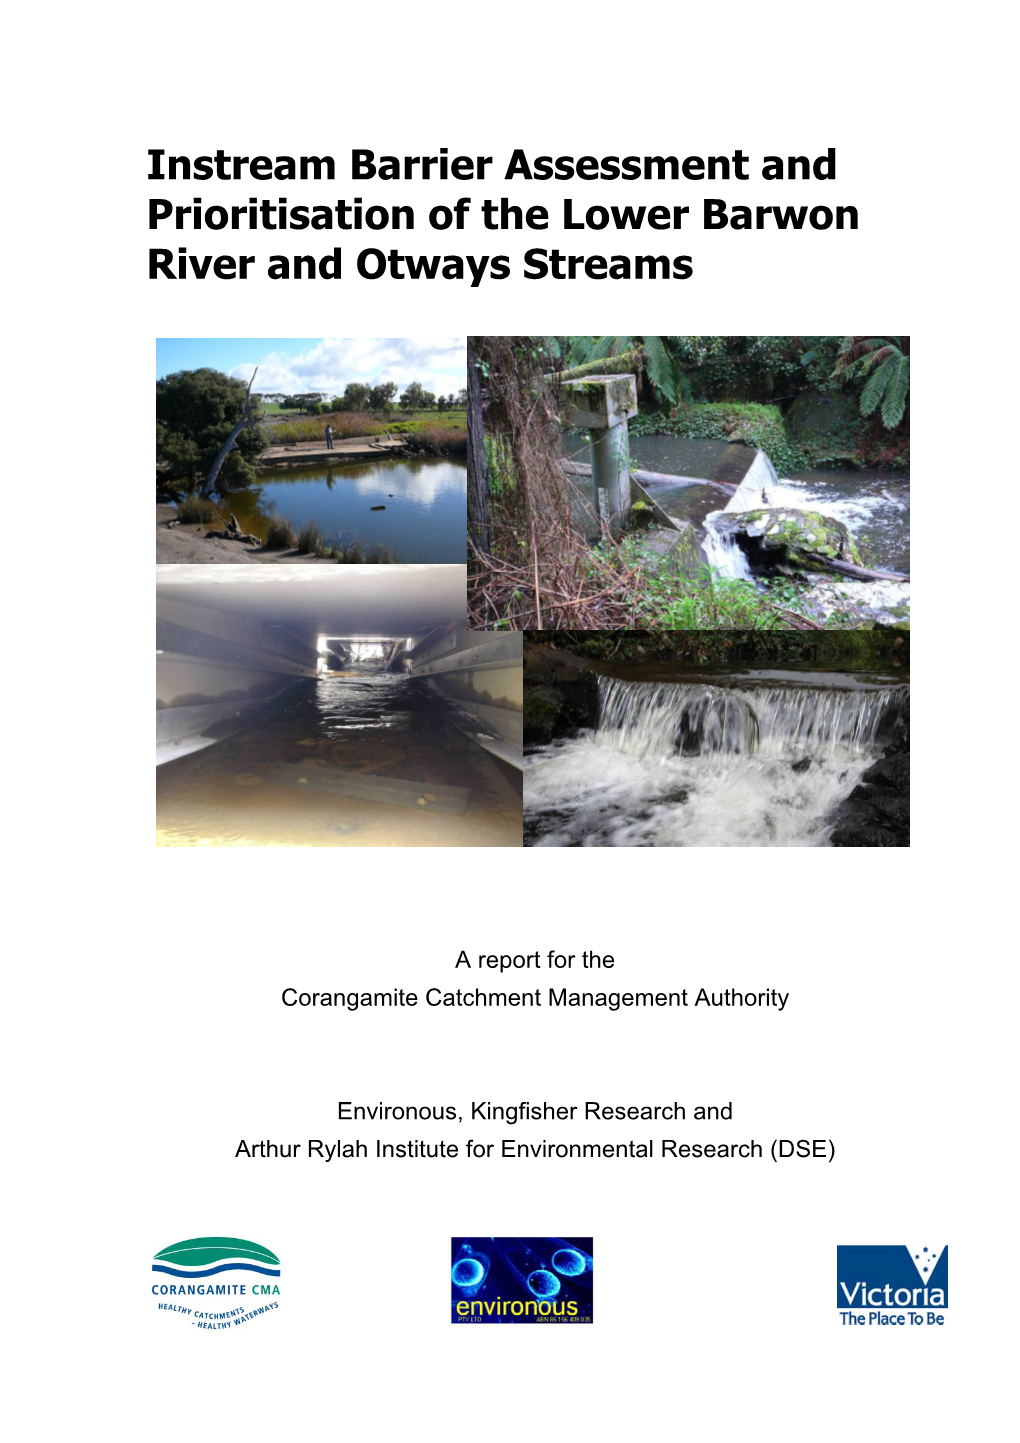 Instream Barrier Assessment and Prioritisation of the Lower Barwon River and Otways Streams